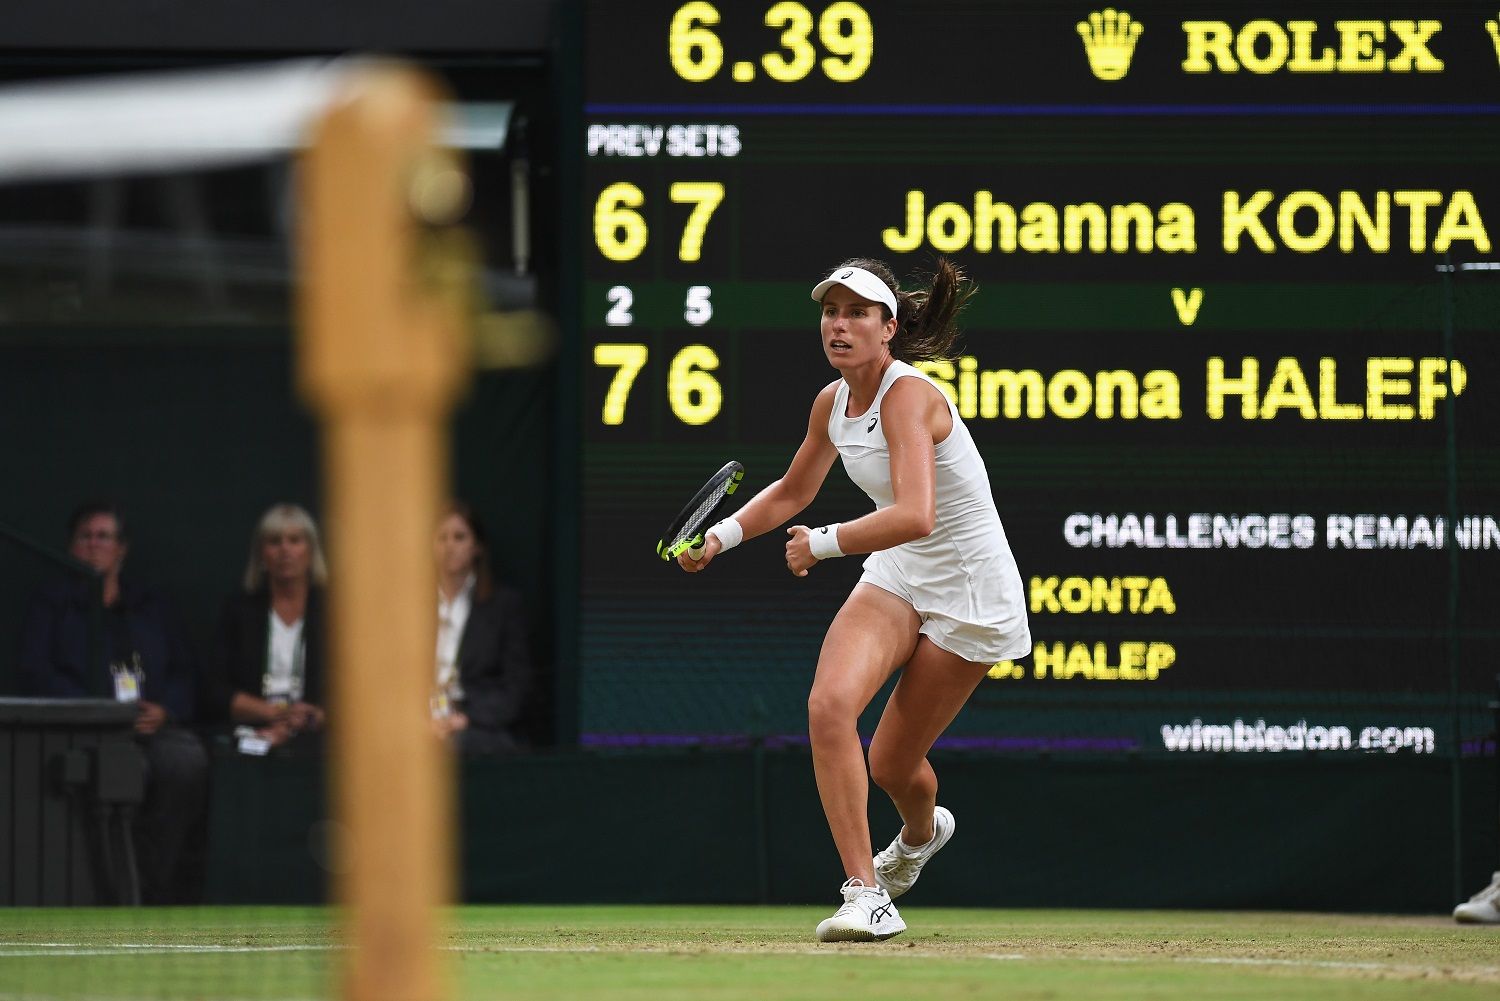 LONDON, ENGLAND - JULY 11:  Johanna Konta of Great Britain runs in during the Ladies Singles quarter final match against Simona Halep of Romania on day eight of the Wimbledon Lawn Tennis Championships at the All England Lawn Tennis and Croquet Club on July 11, 2017 in London, England.  (Photo by Shaun Botterill/Getty Images)